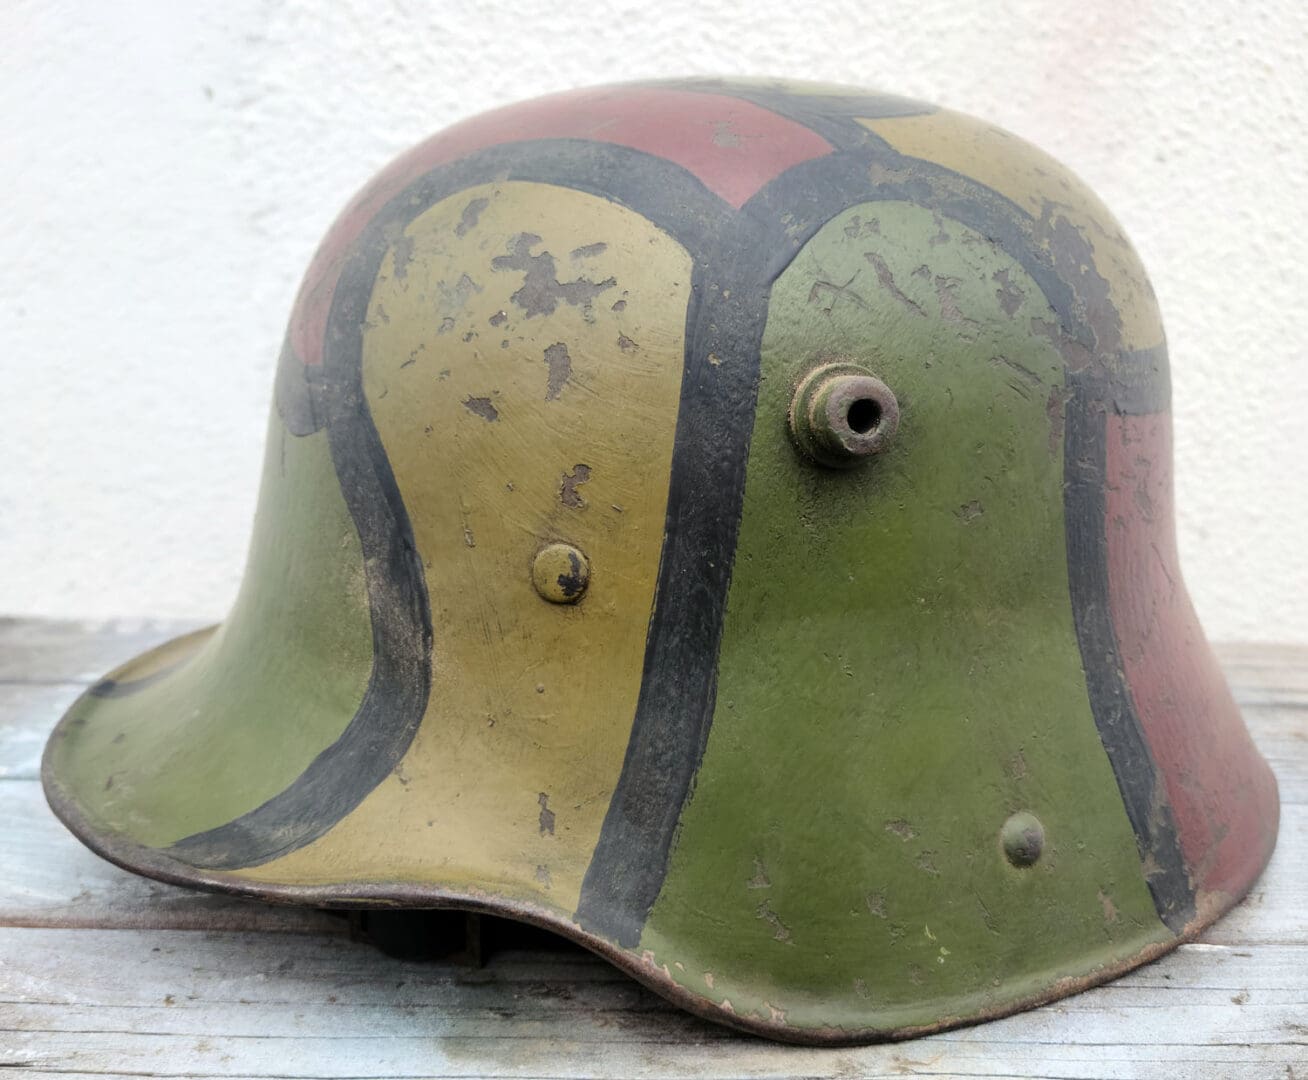 A german helmet with a painted design on it.